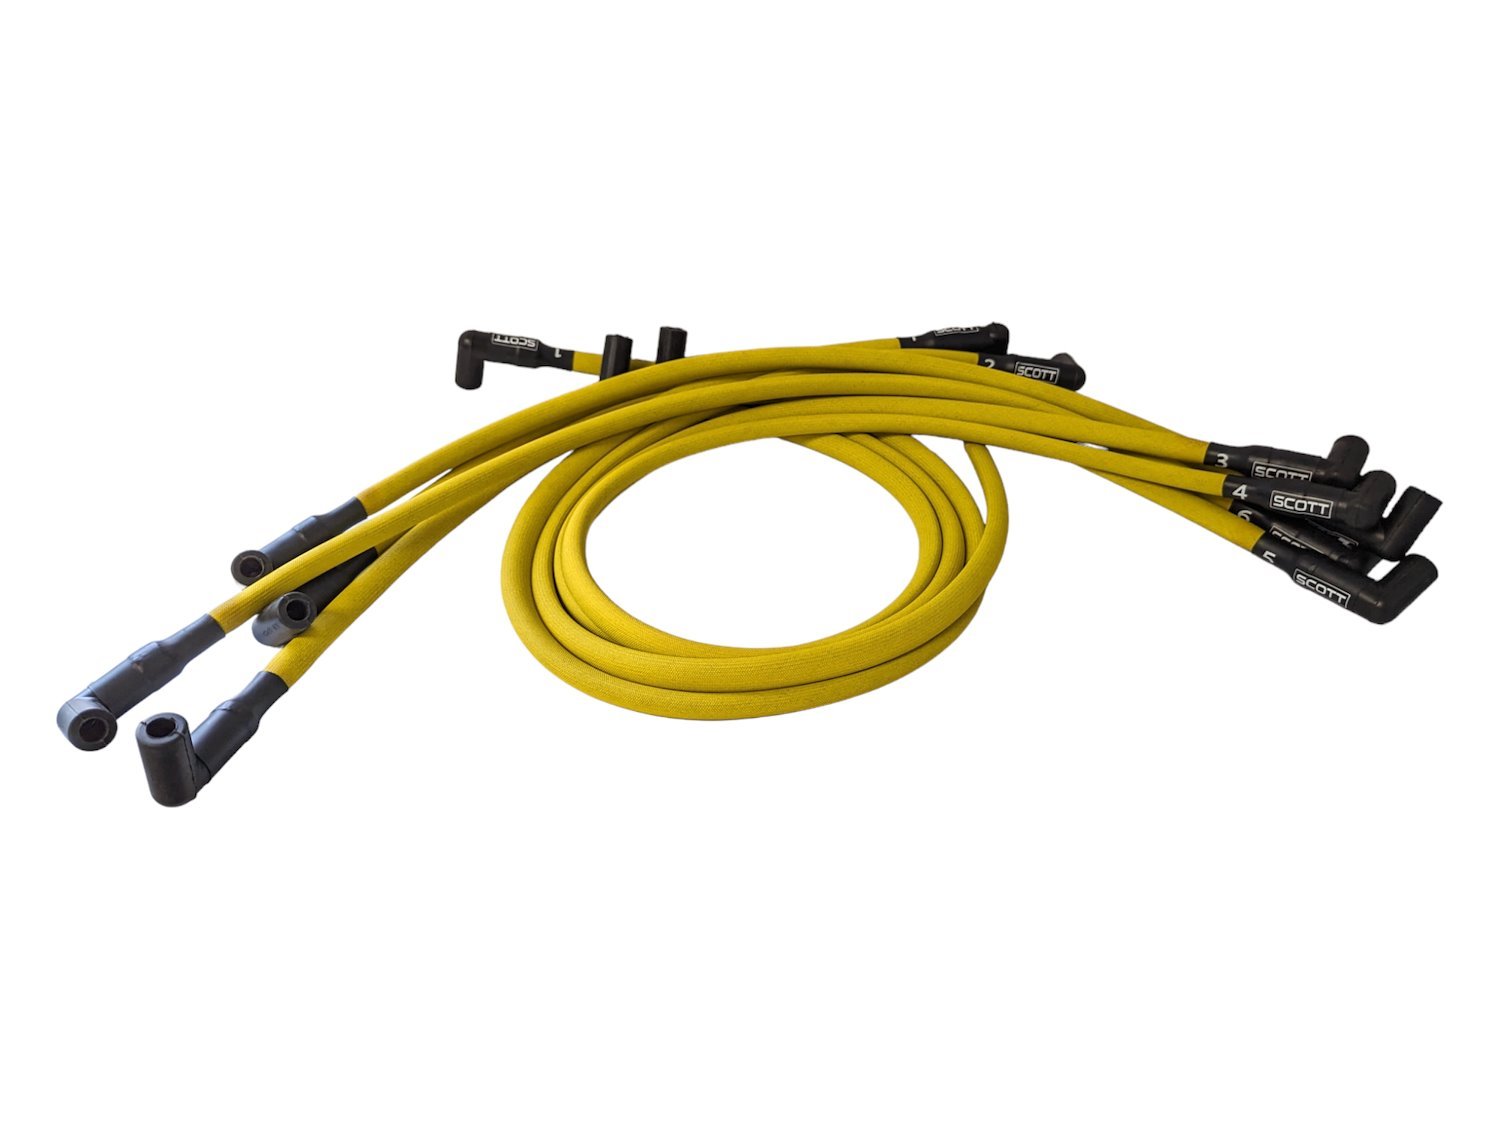 SPW-PS-604-5 High-Performance Fiberglass-Oversleeved Spark Plug Wire Set for Small Block Chevy 604 Crate, Under Header [Yellow]